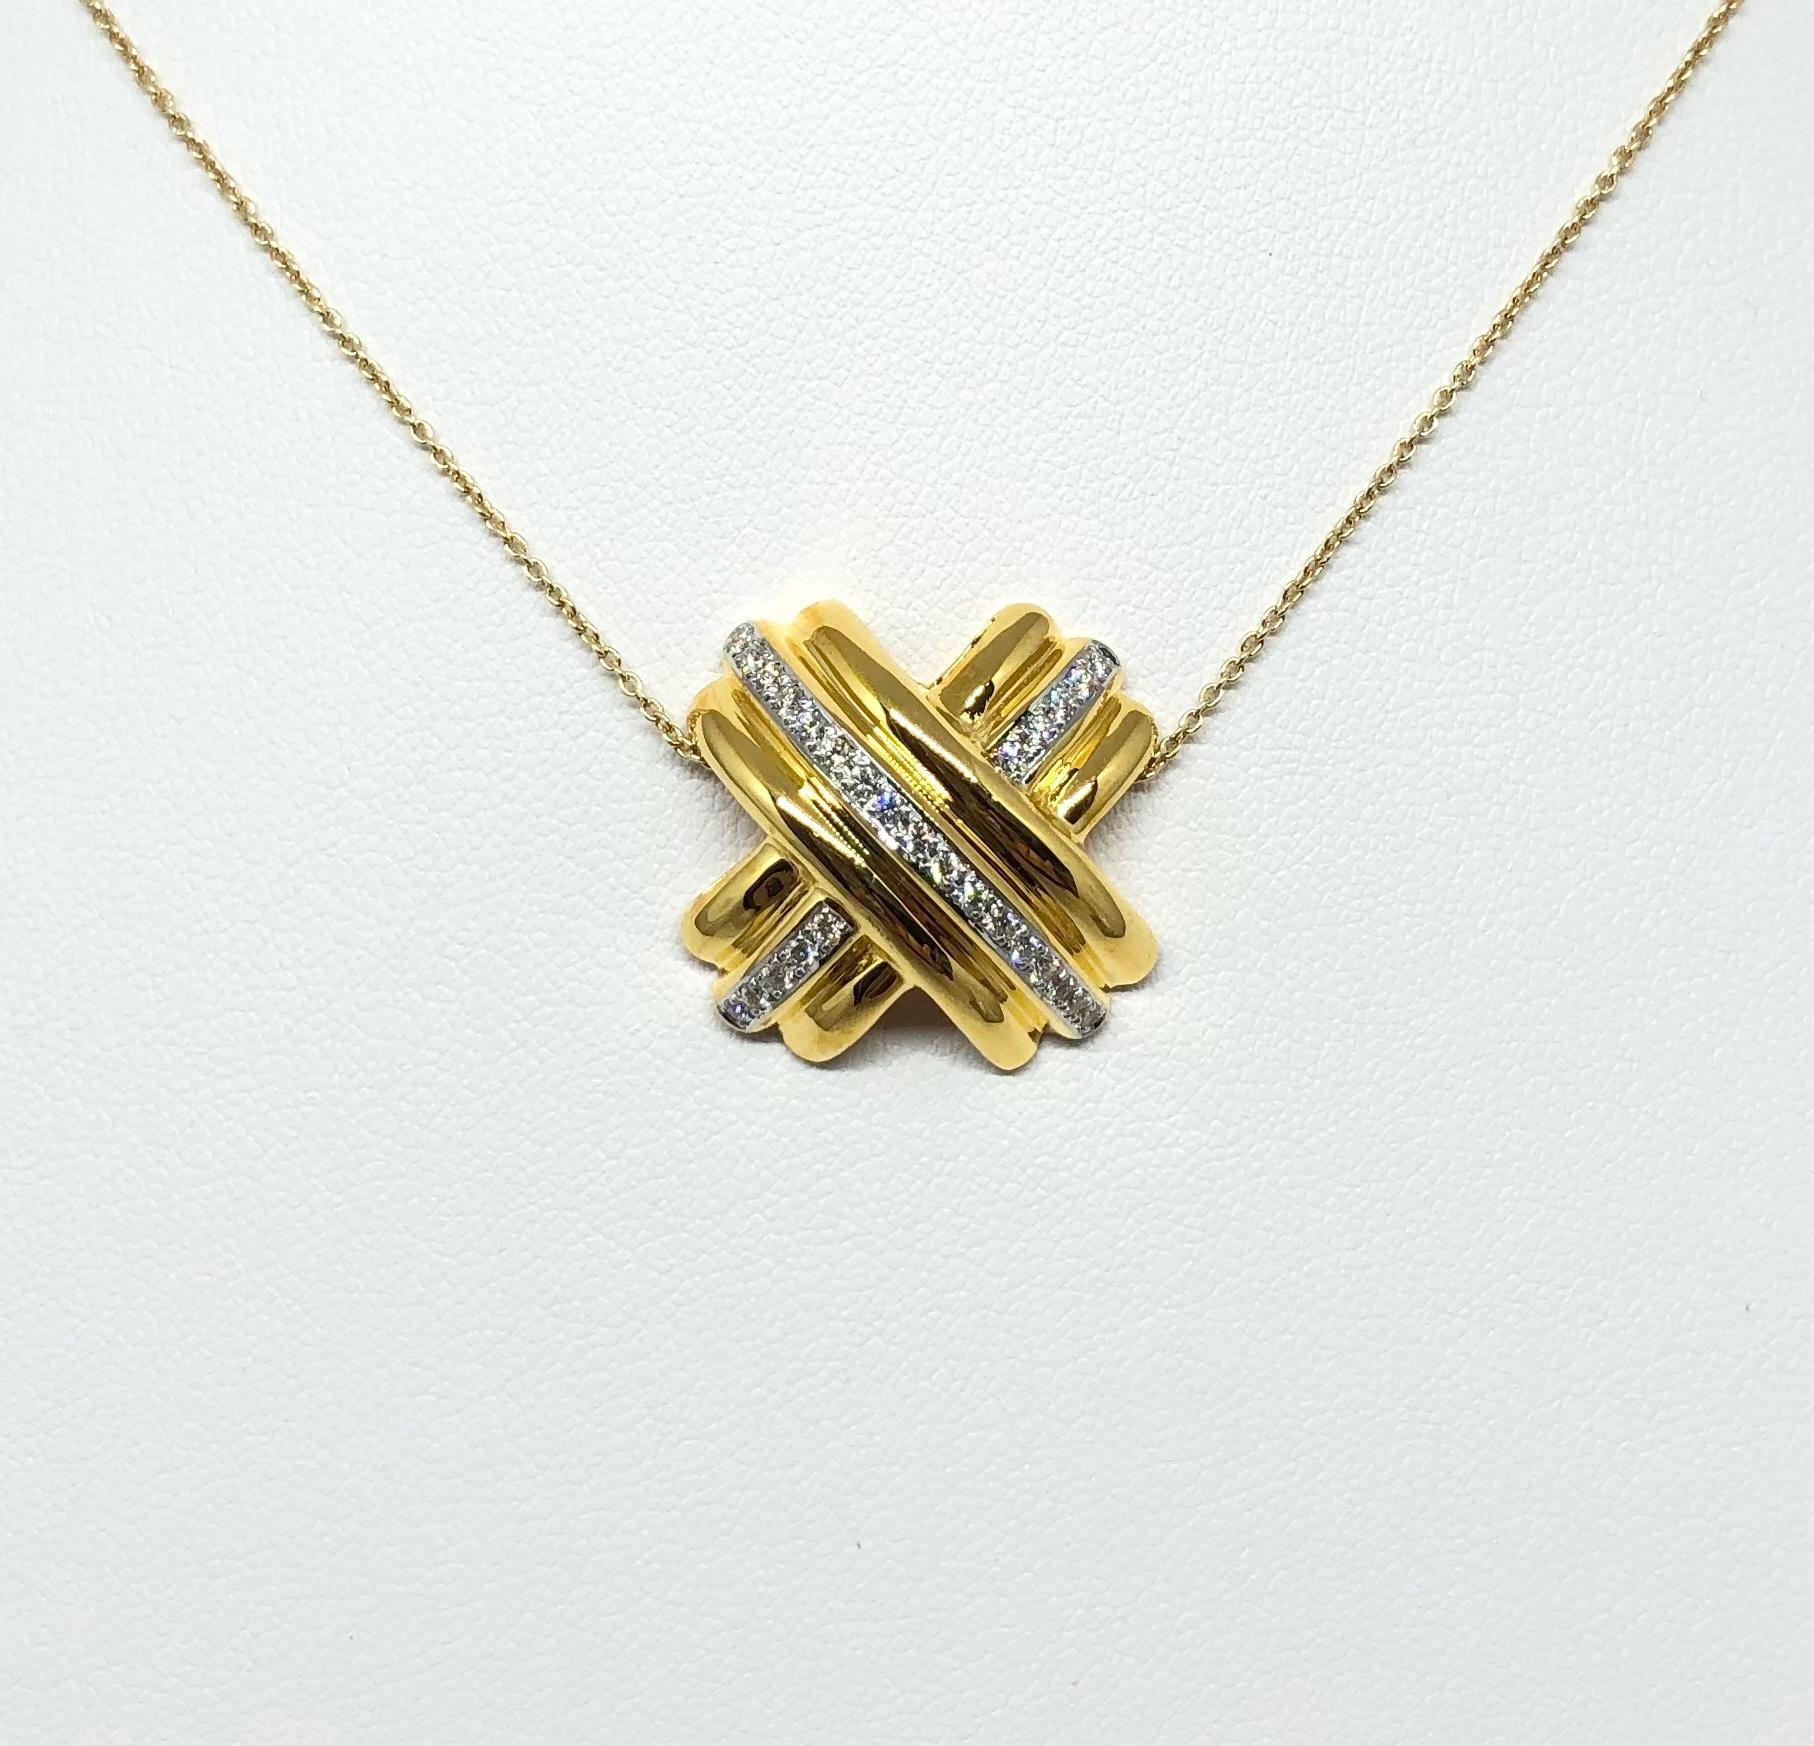 Diamond 0.28 carat Pendant set in 18 Karat Gold Settings
(chain not included)

Width:  2.4 cm 
Length: 2.4 cm
Total Weight: 5.48 grams

